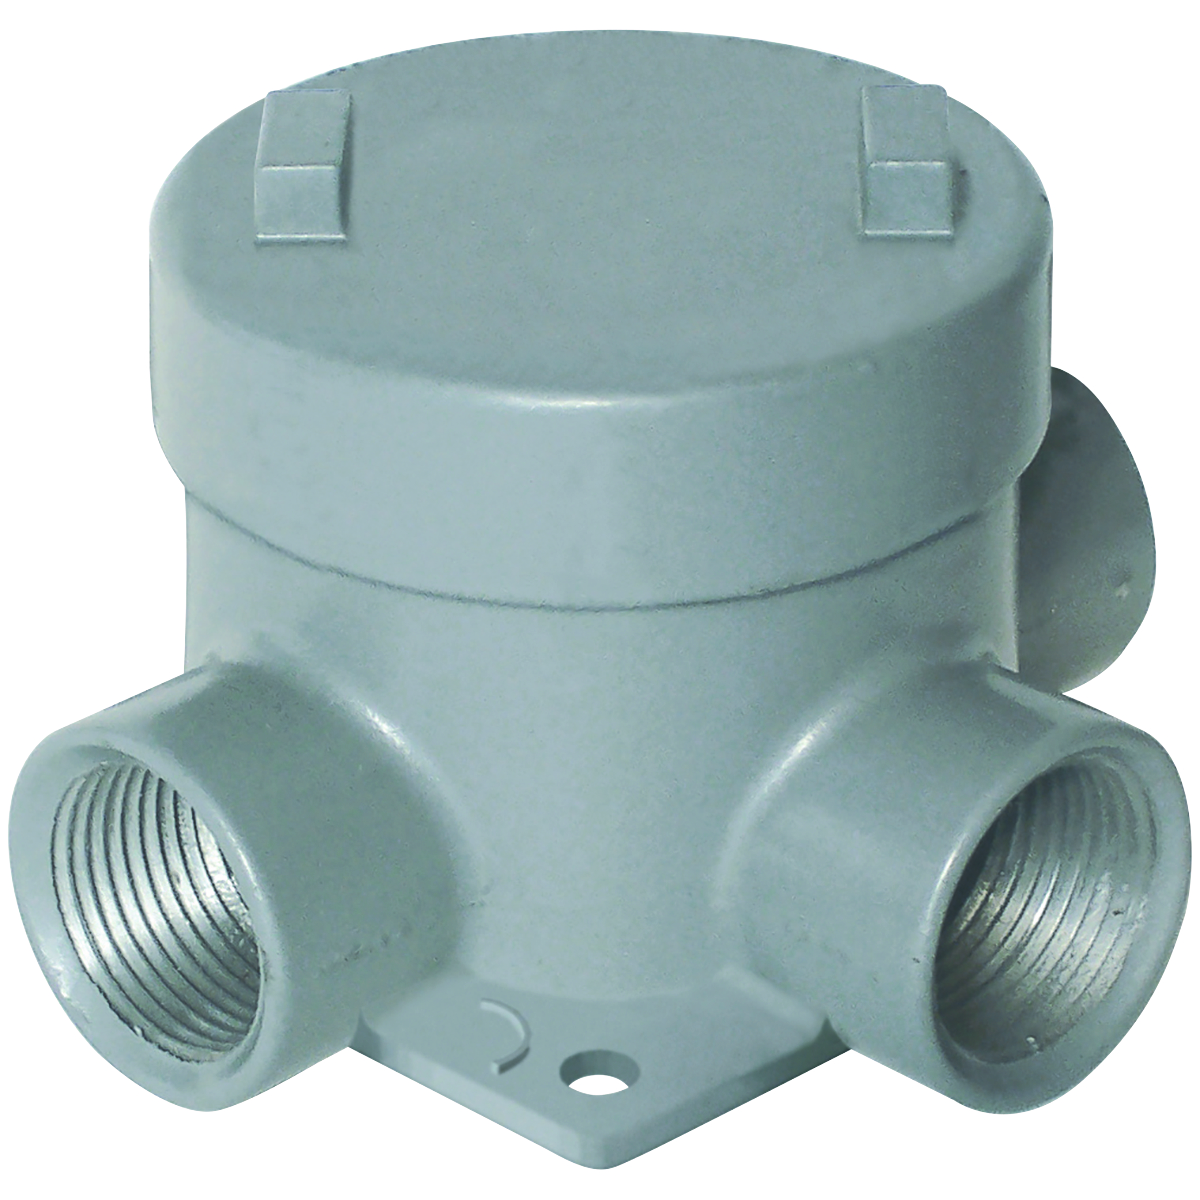 GEB SERIES - ALUMINUM OUTLET BODY - T TYPE - HUB SIZE 3/4 INCH (TWOHUBS) AND 1-1/4 INCH (ONE HUB) - VOLUME 29.0 CUBIC INCHES